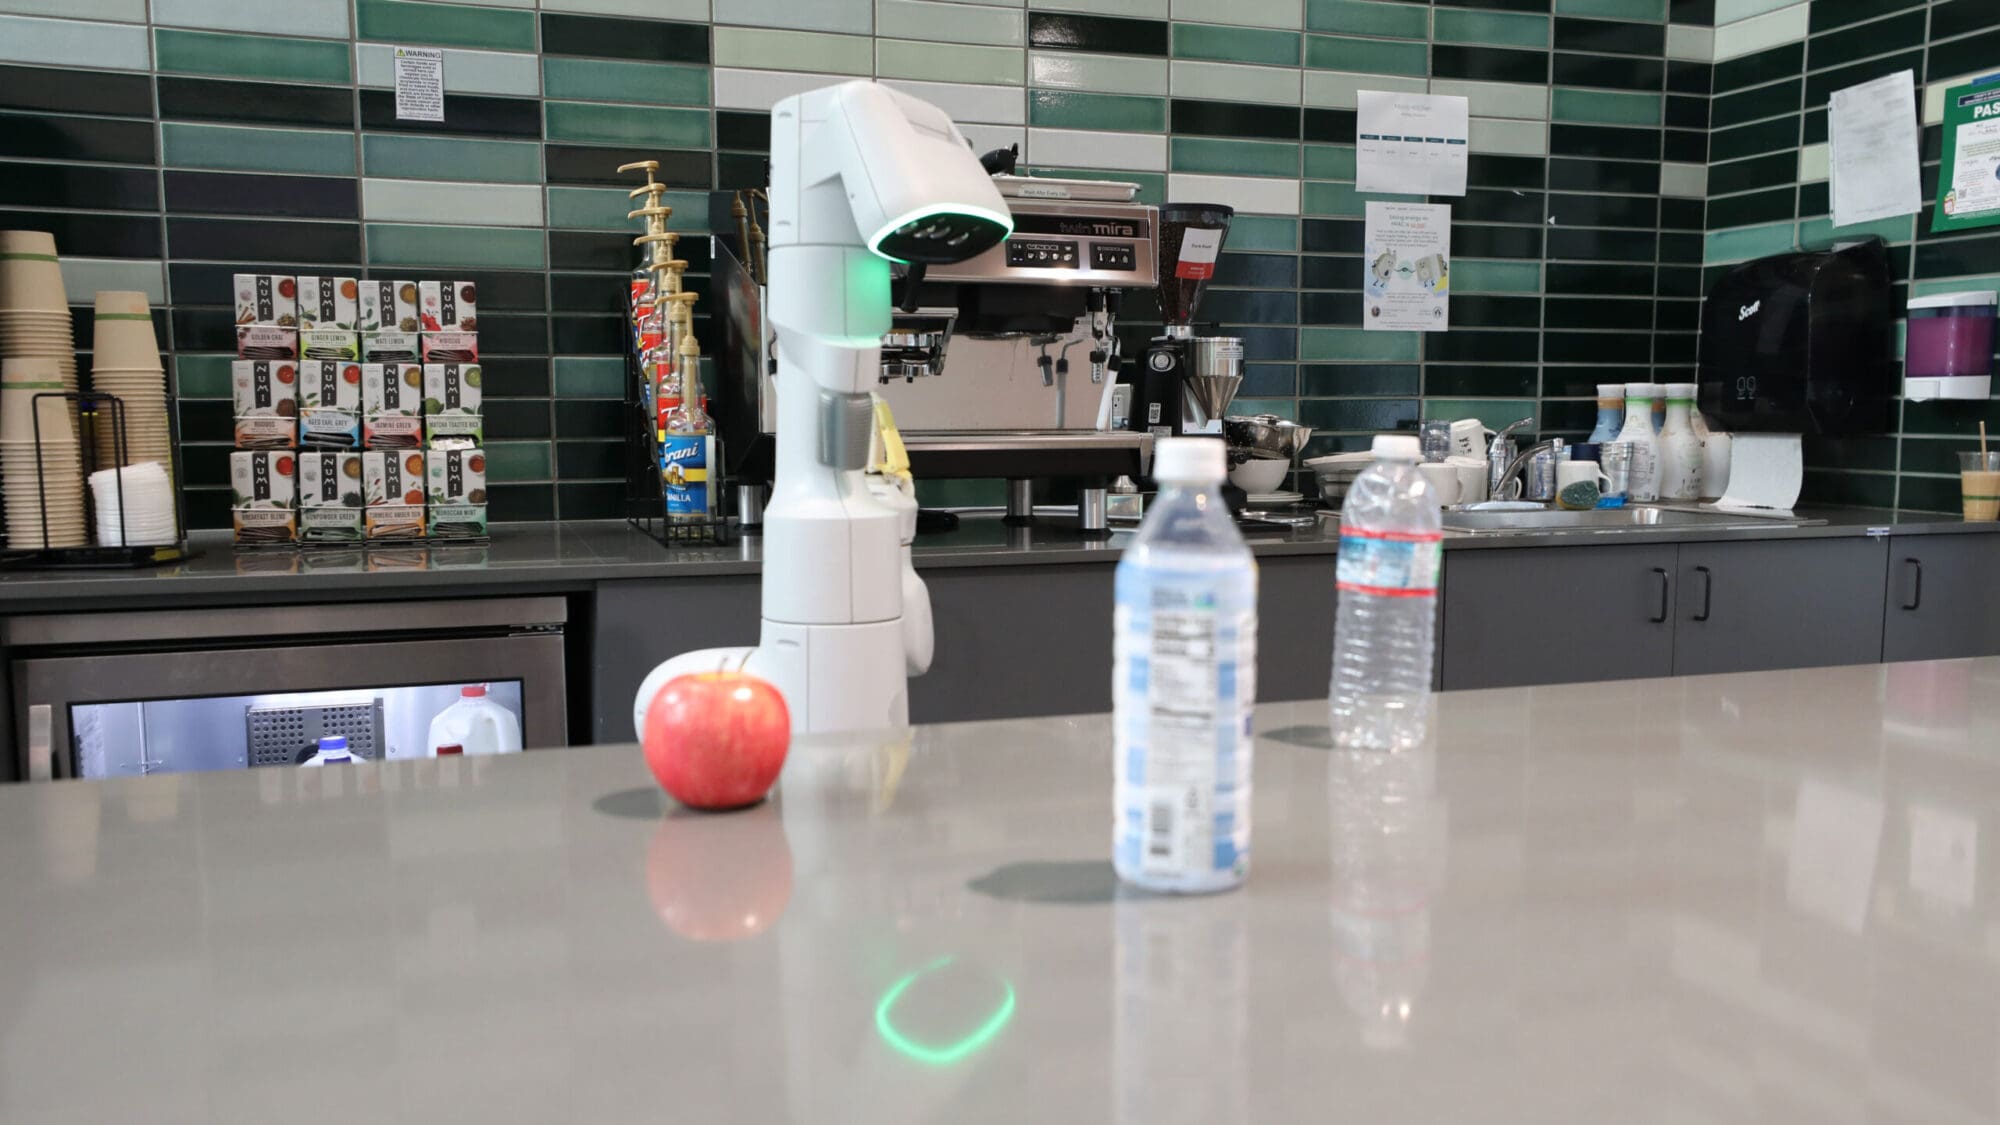 Photo of a robot with a camera "face" looking at a kitchen counter with two plastic water bottles and an apple.